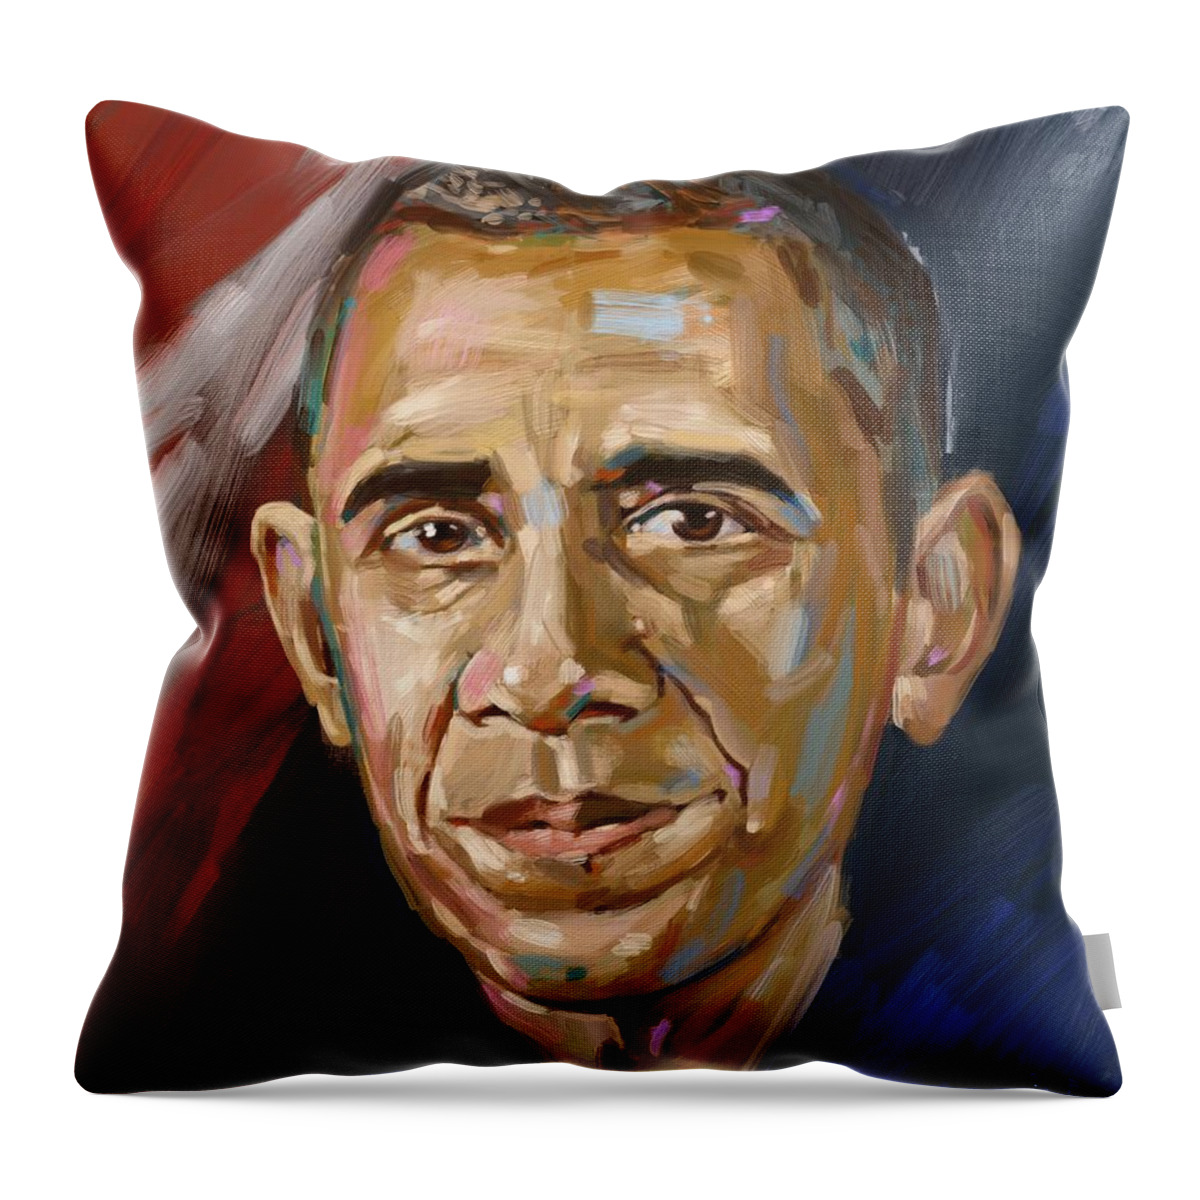 Obama Throw Pillow featuring the painting Barack by Arie Van der Wijst